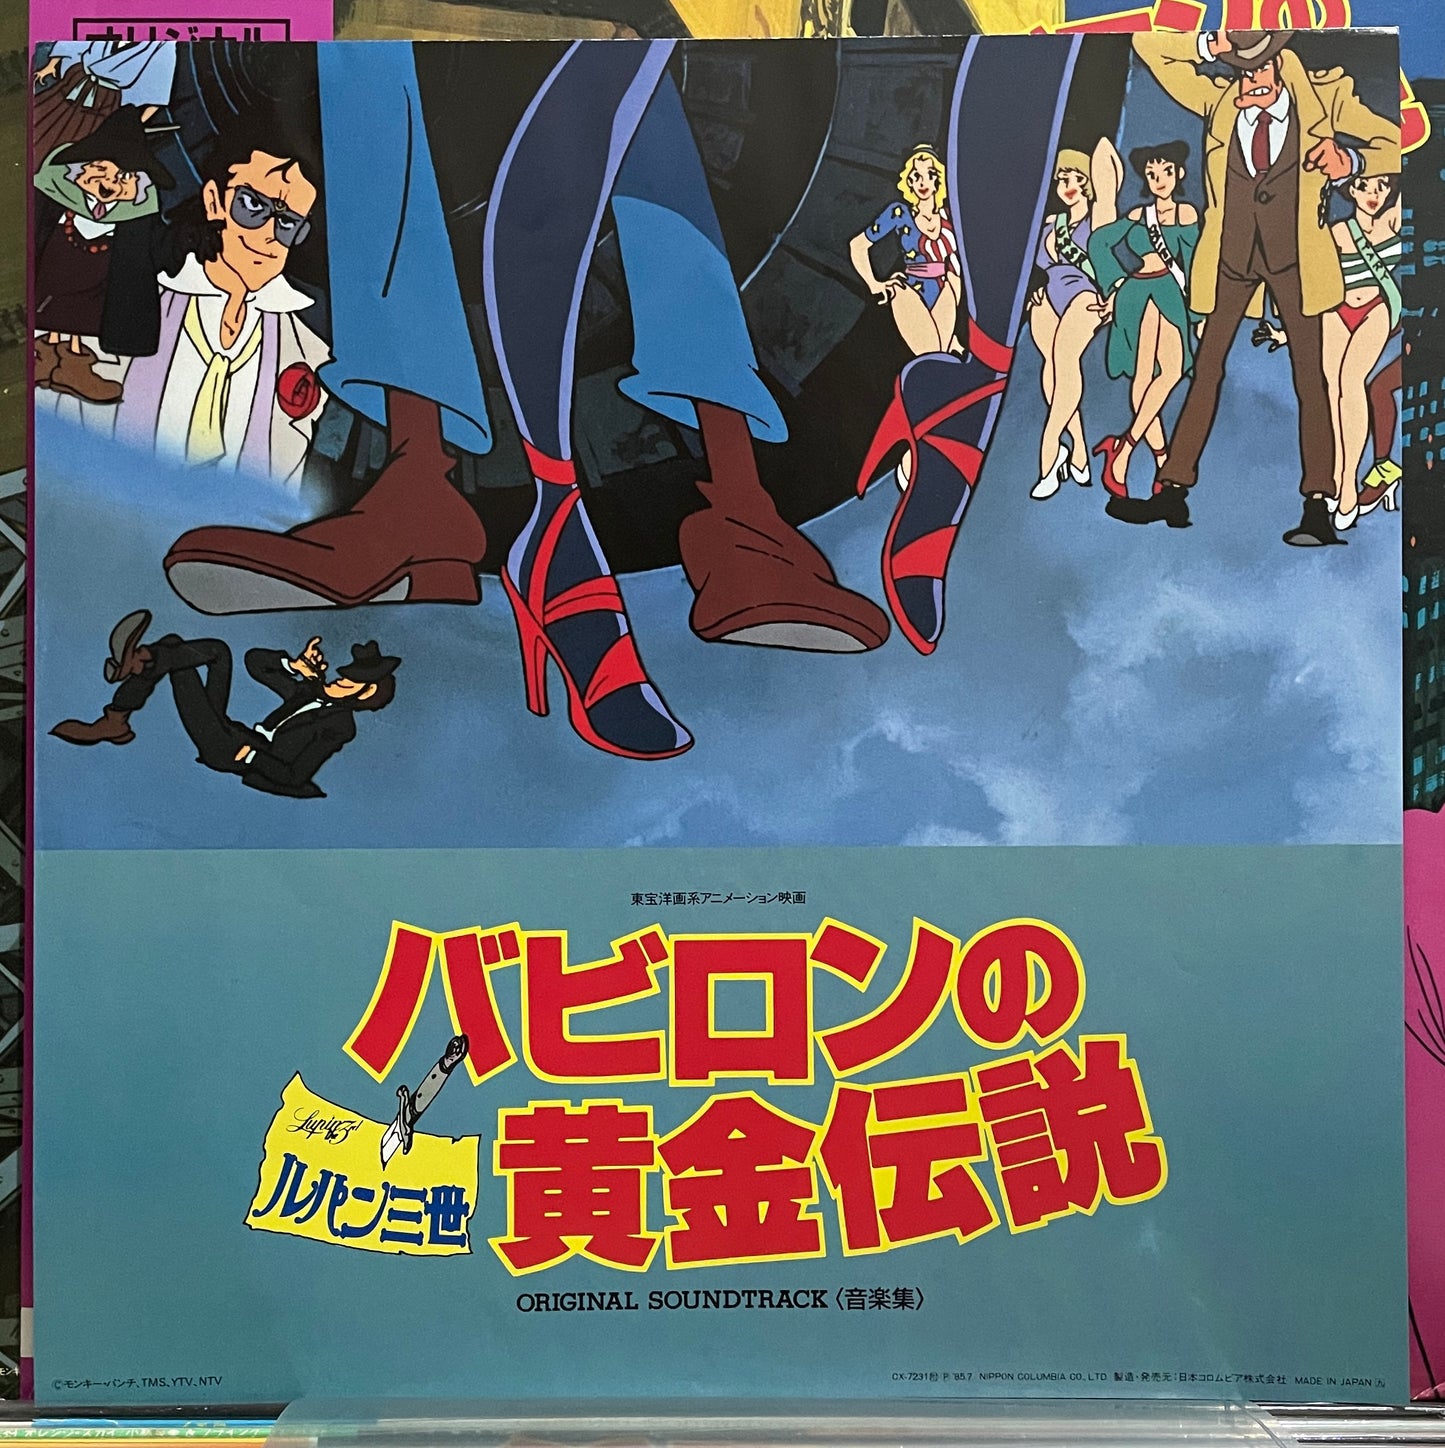 Yuji Ohno (You & The Explosion Band) “Lupin The 3rd: バビロンの黄金伝説” OST (1985)